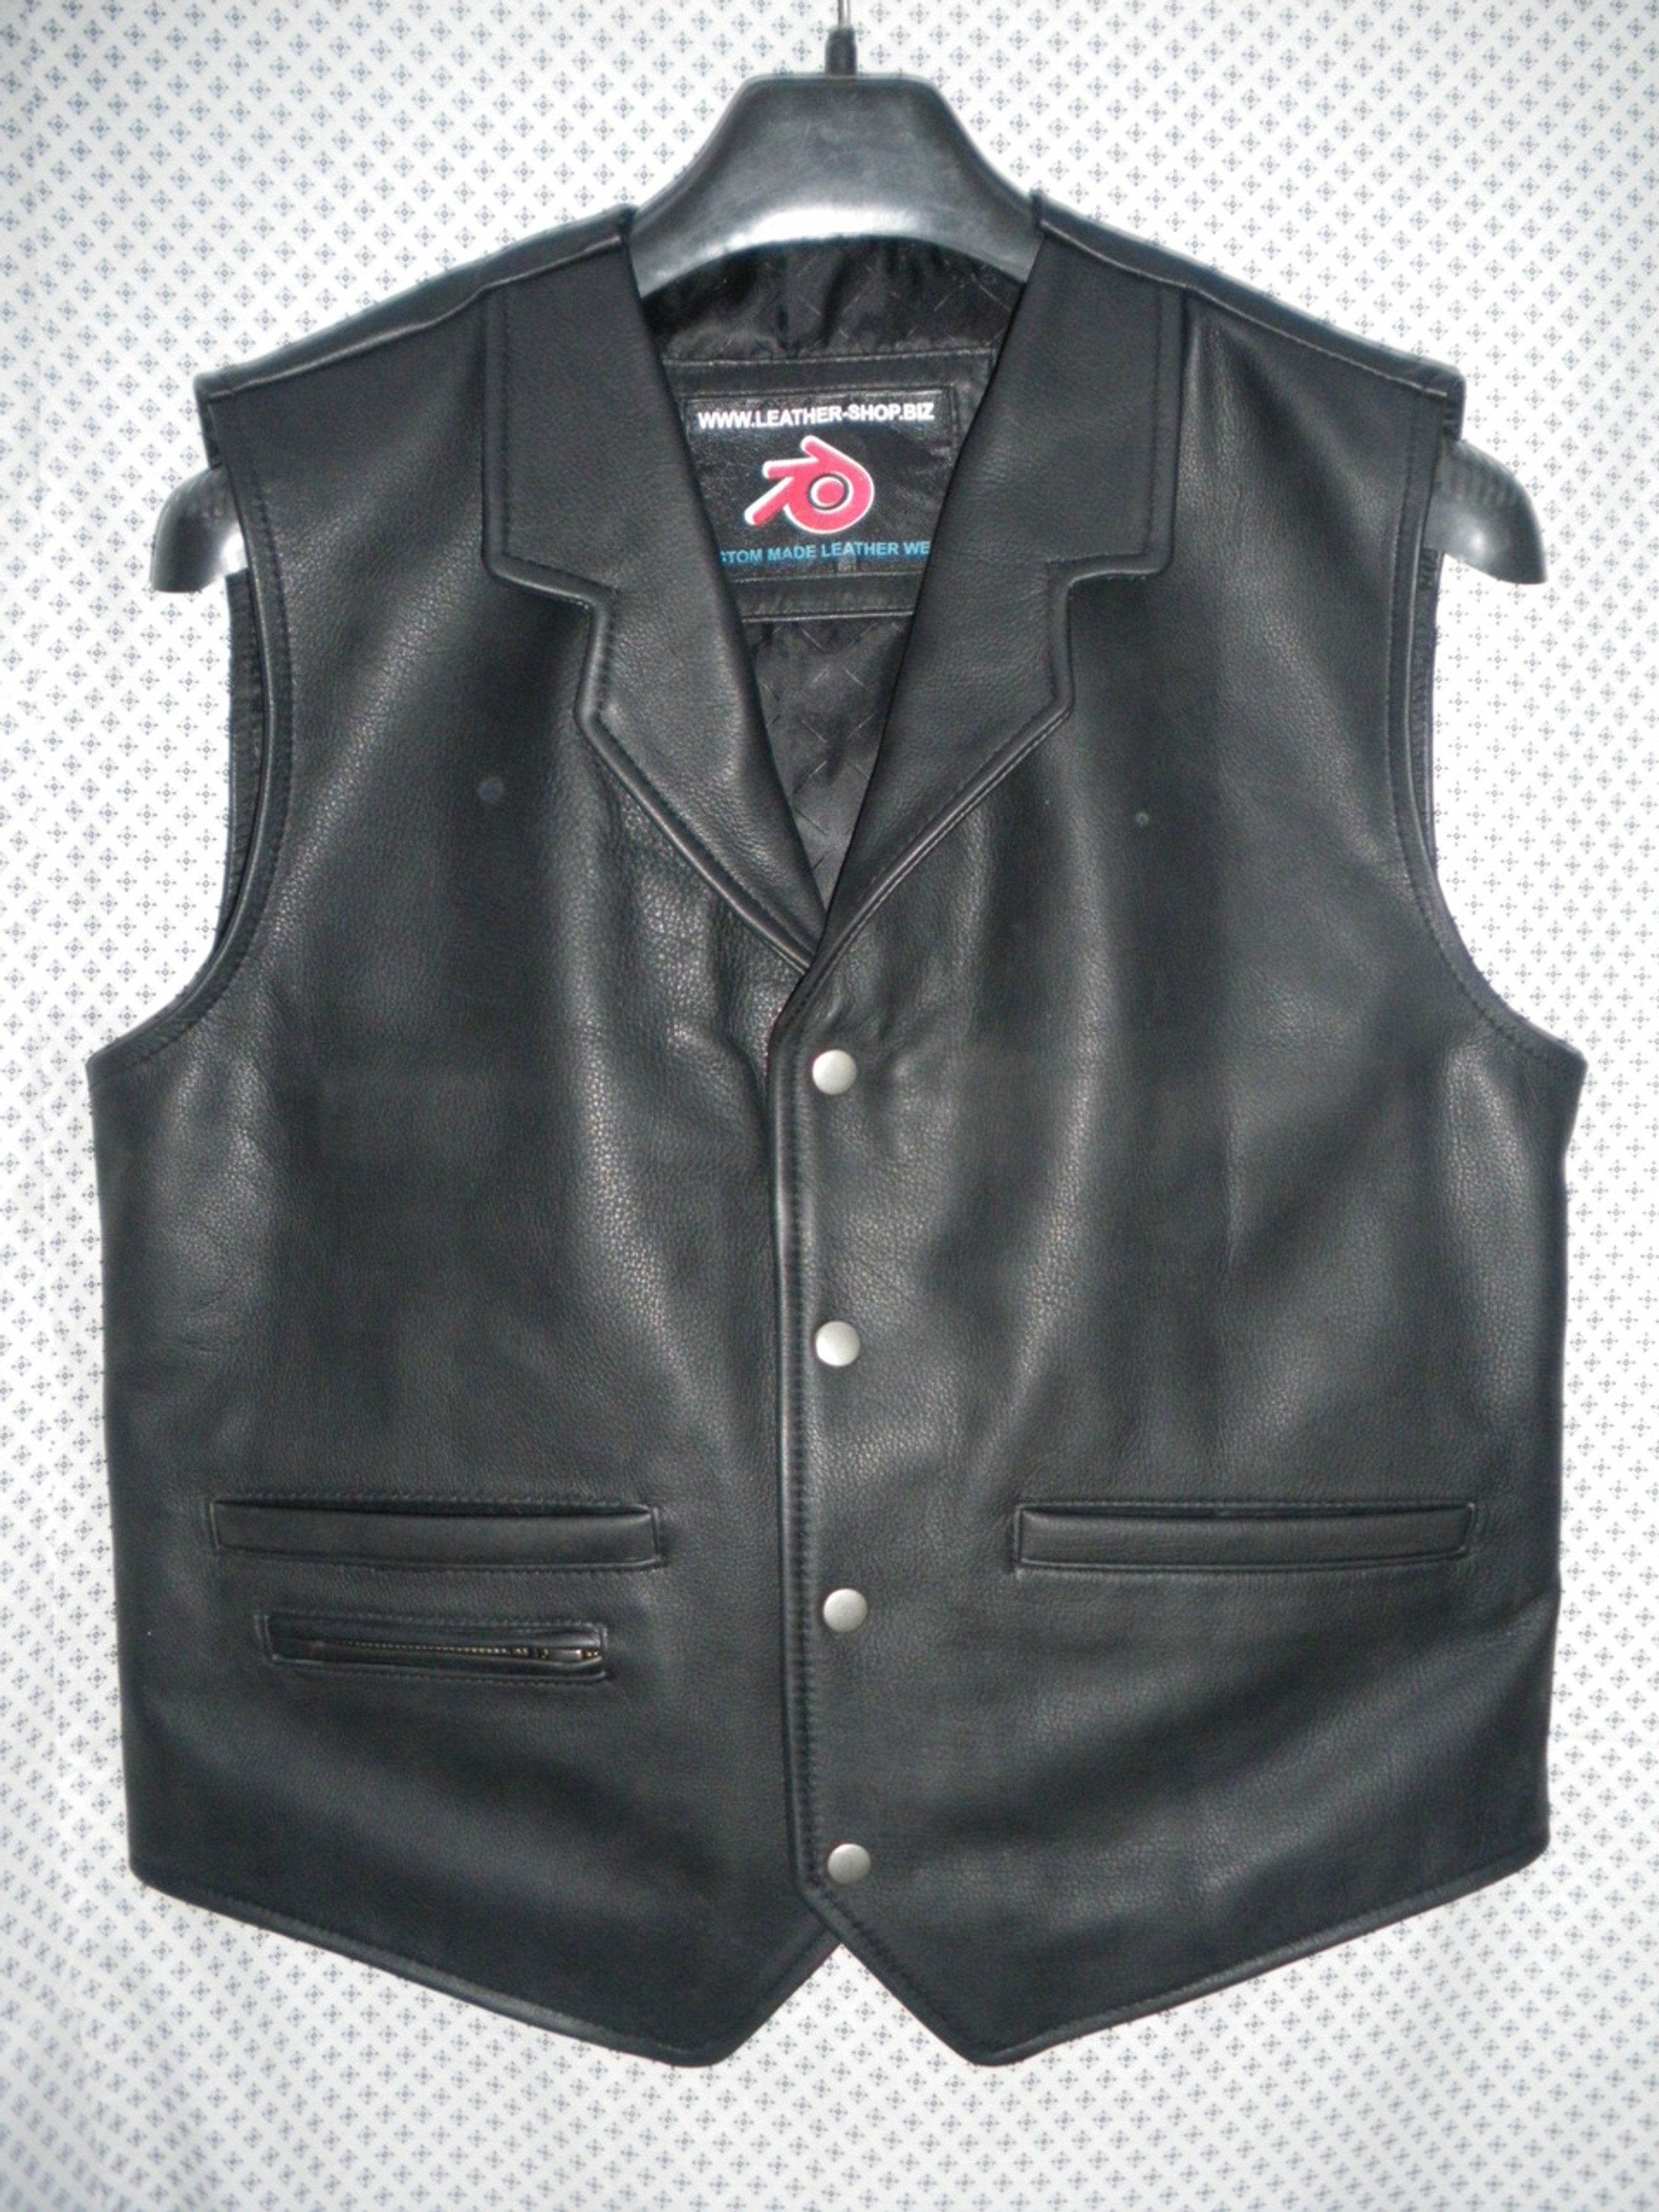 LEATHER-SHOP.BIZ Leather Jackets and more custom made